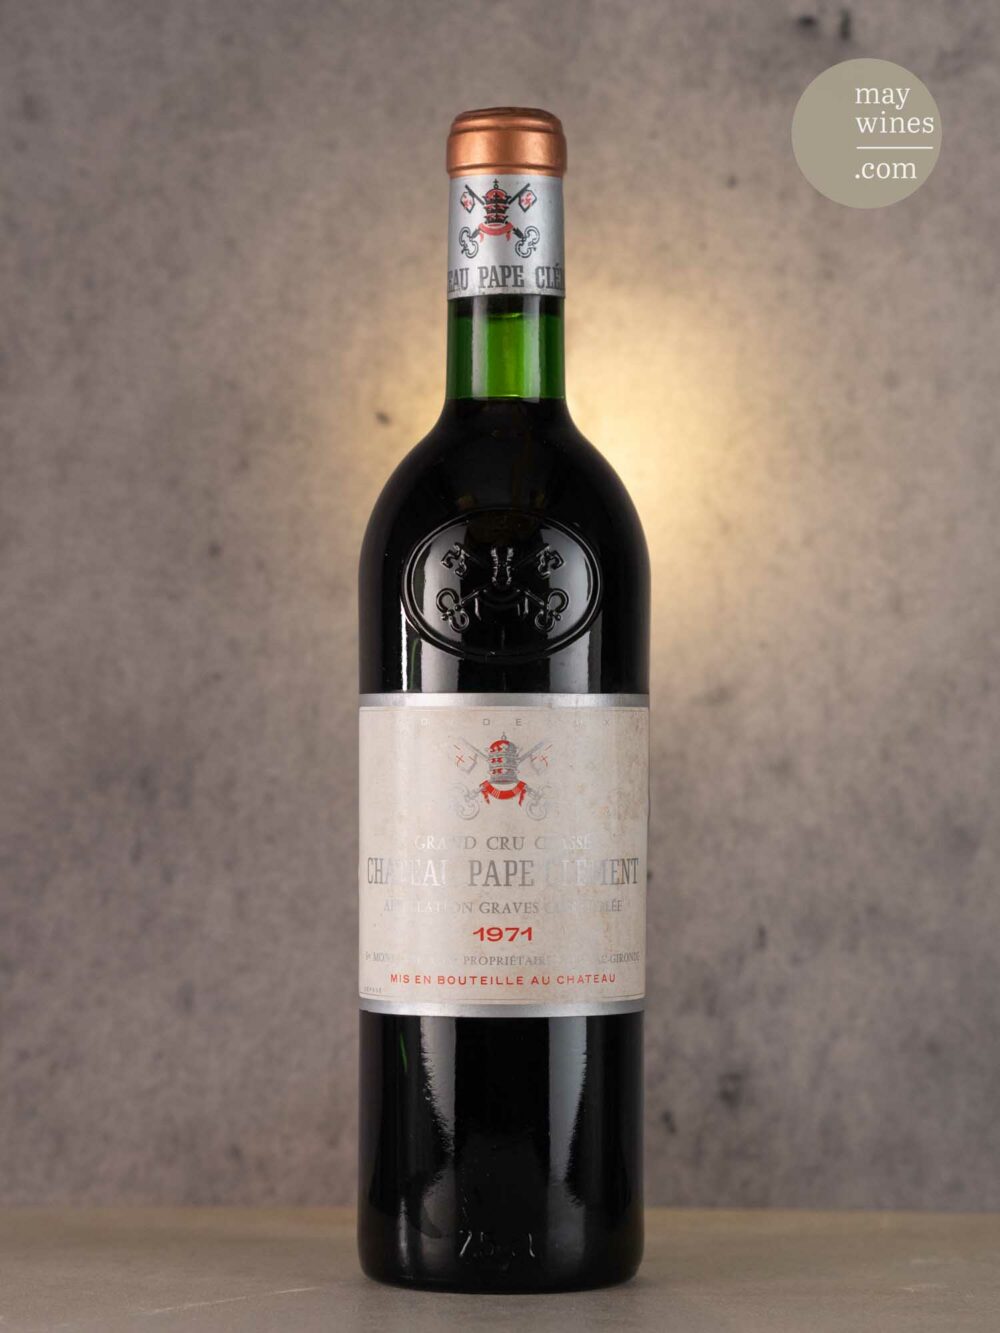 May Wines – Rotwein – 1971 Château Pape Clément